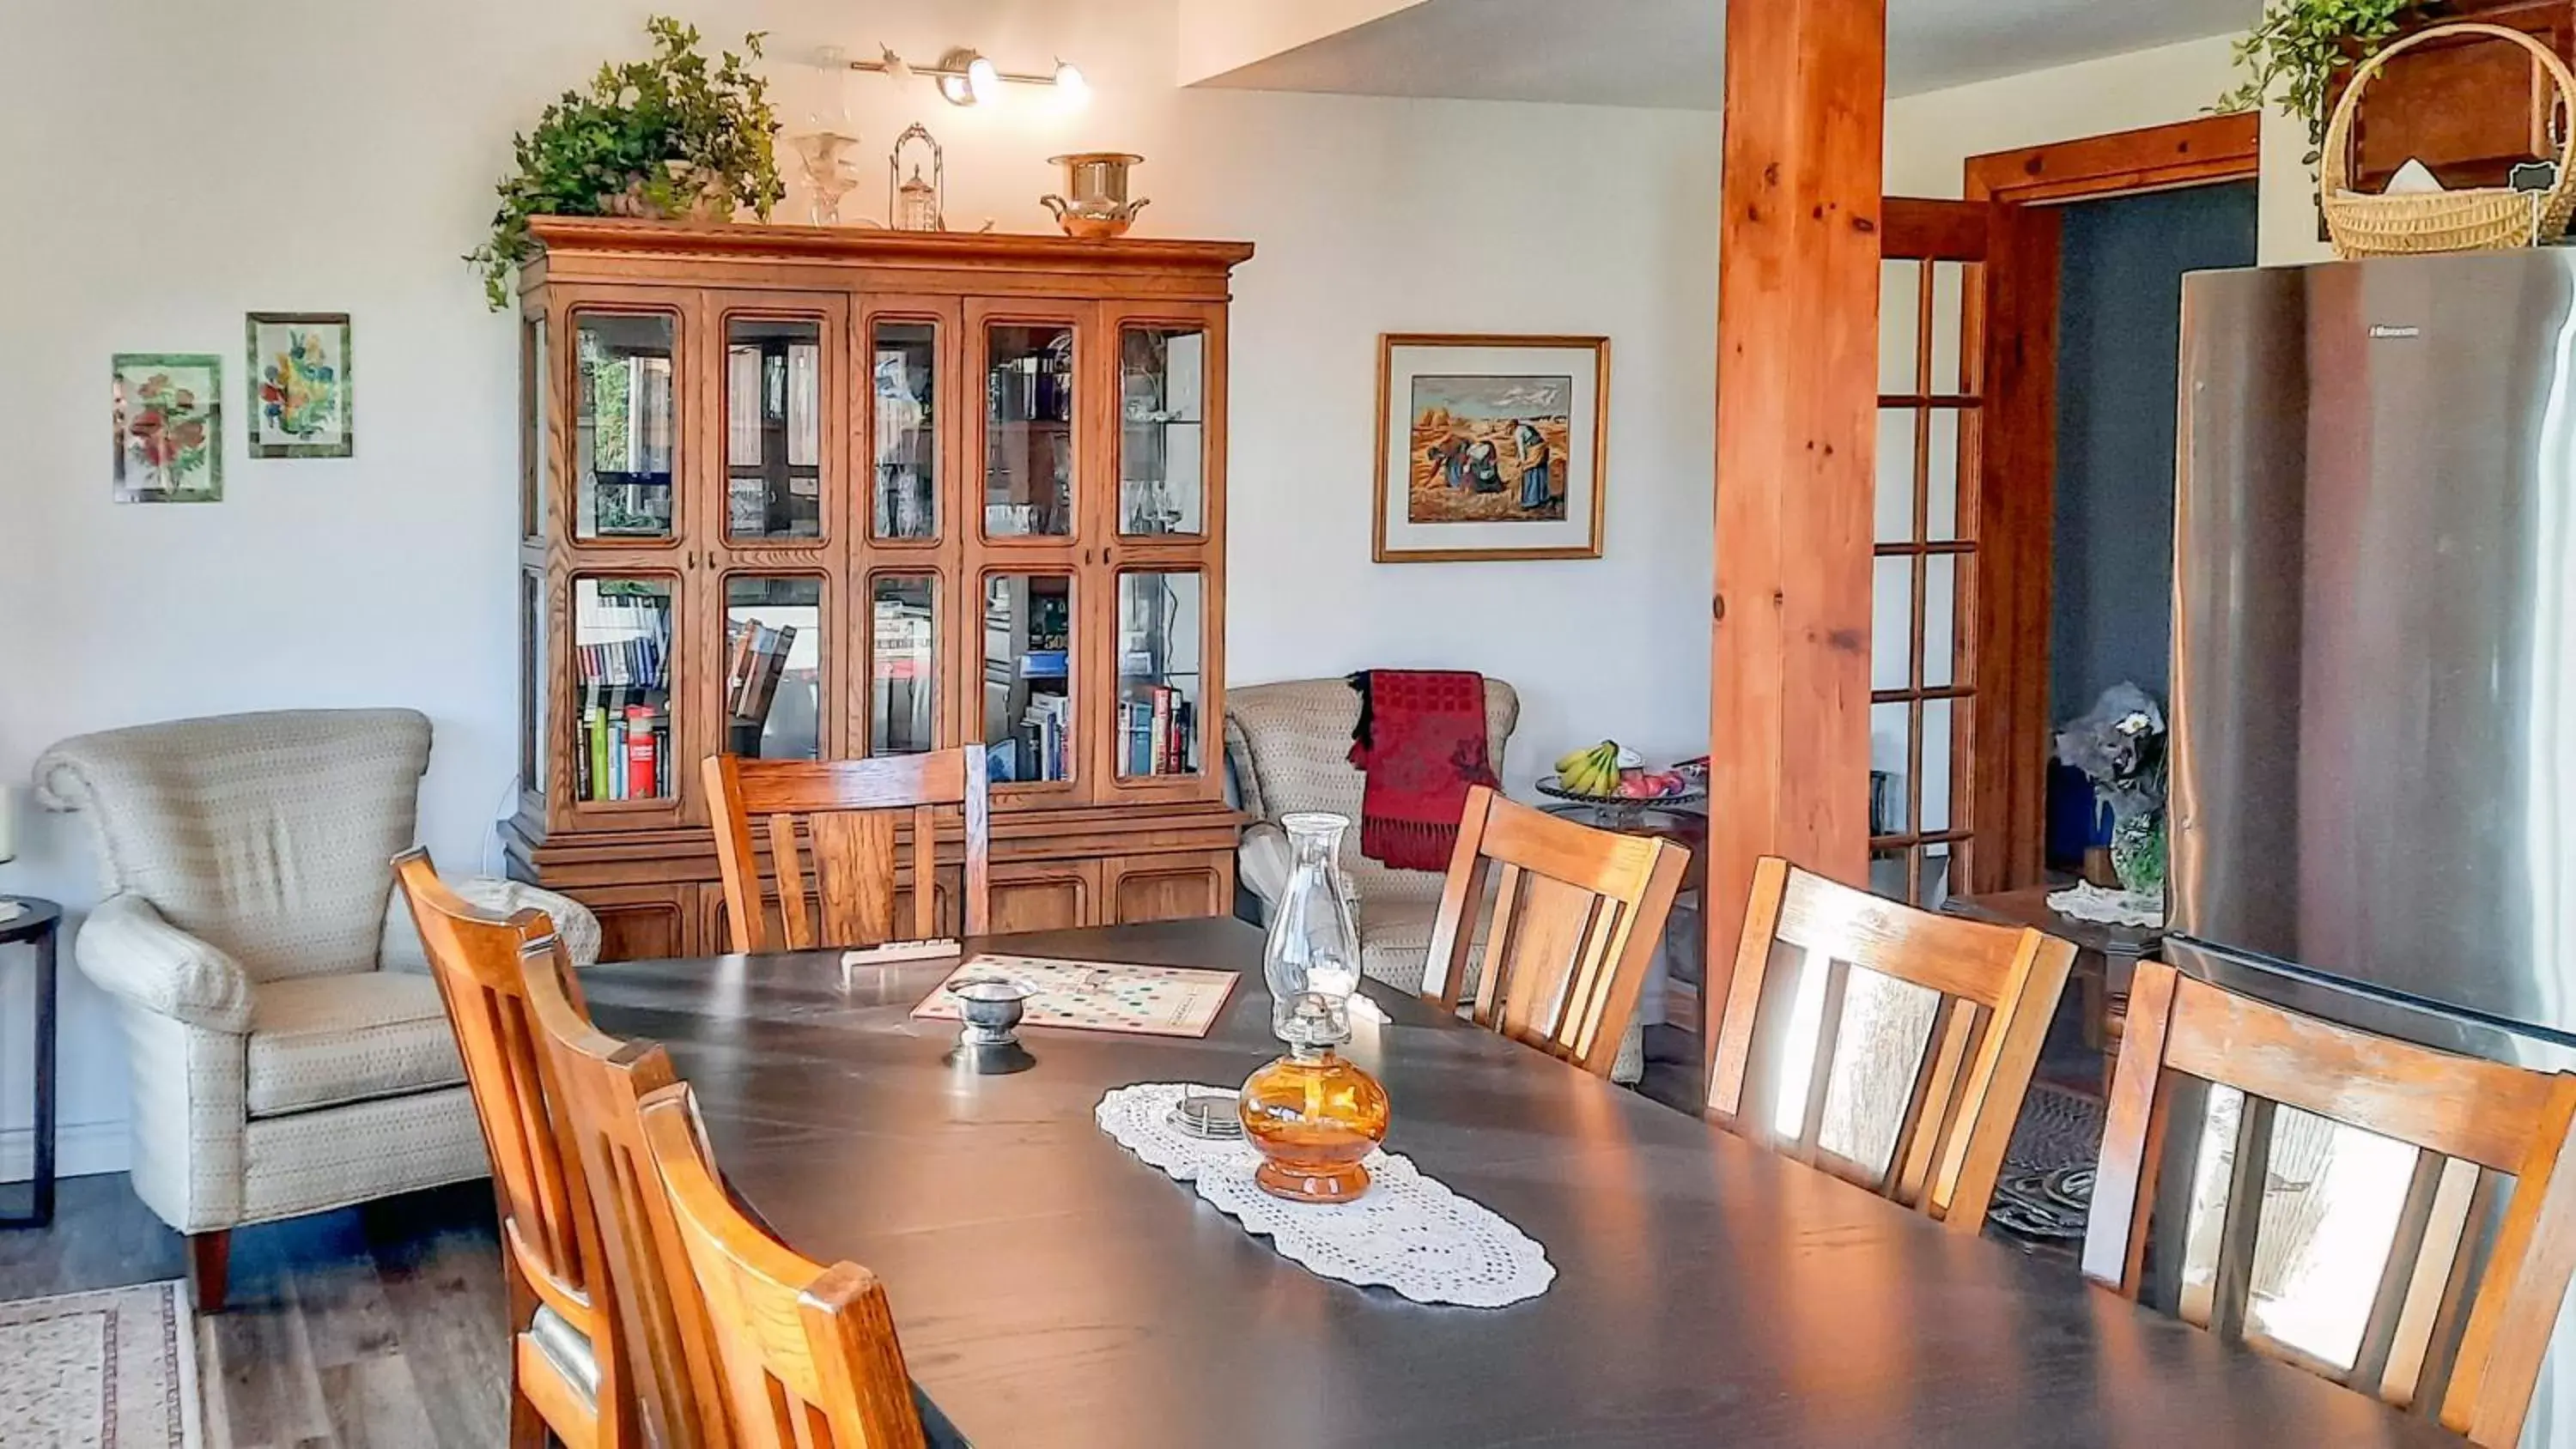 Property building, Dining Area in Edelweiss Inn Nova Scotia